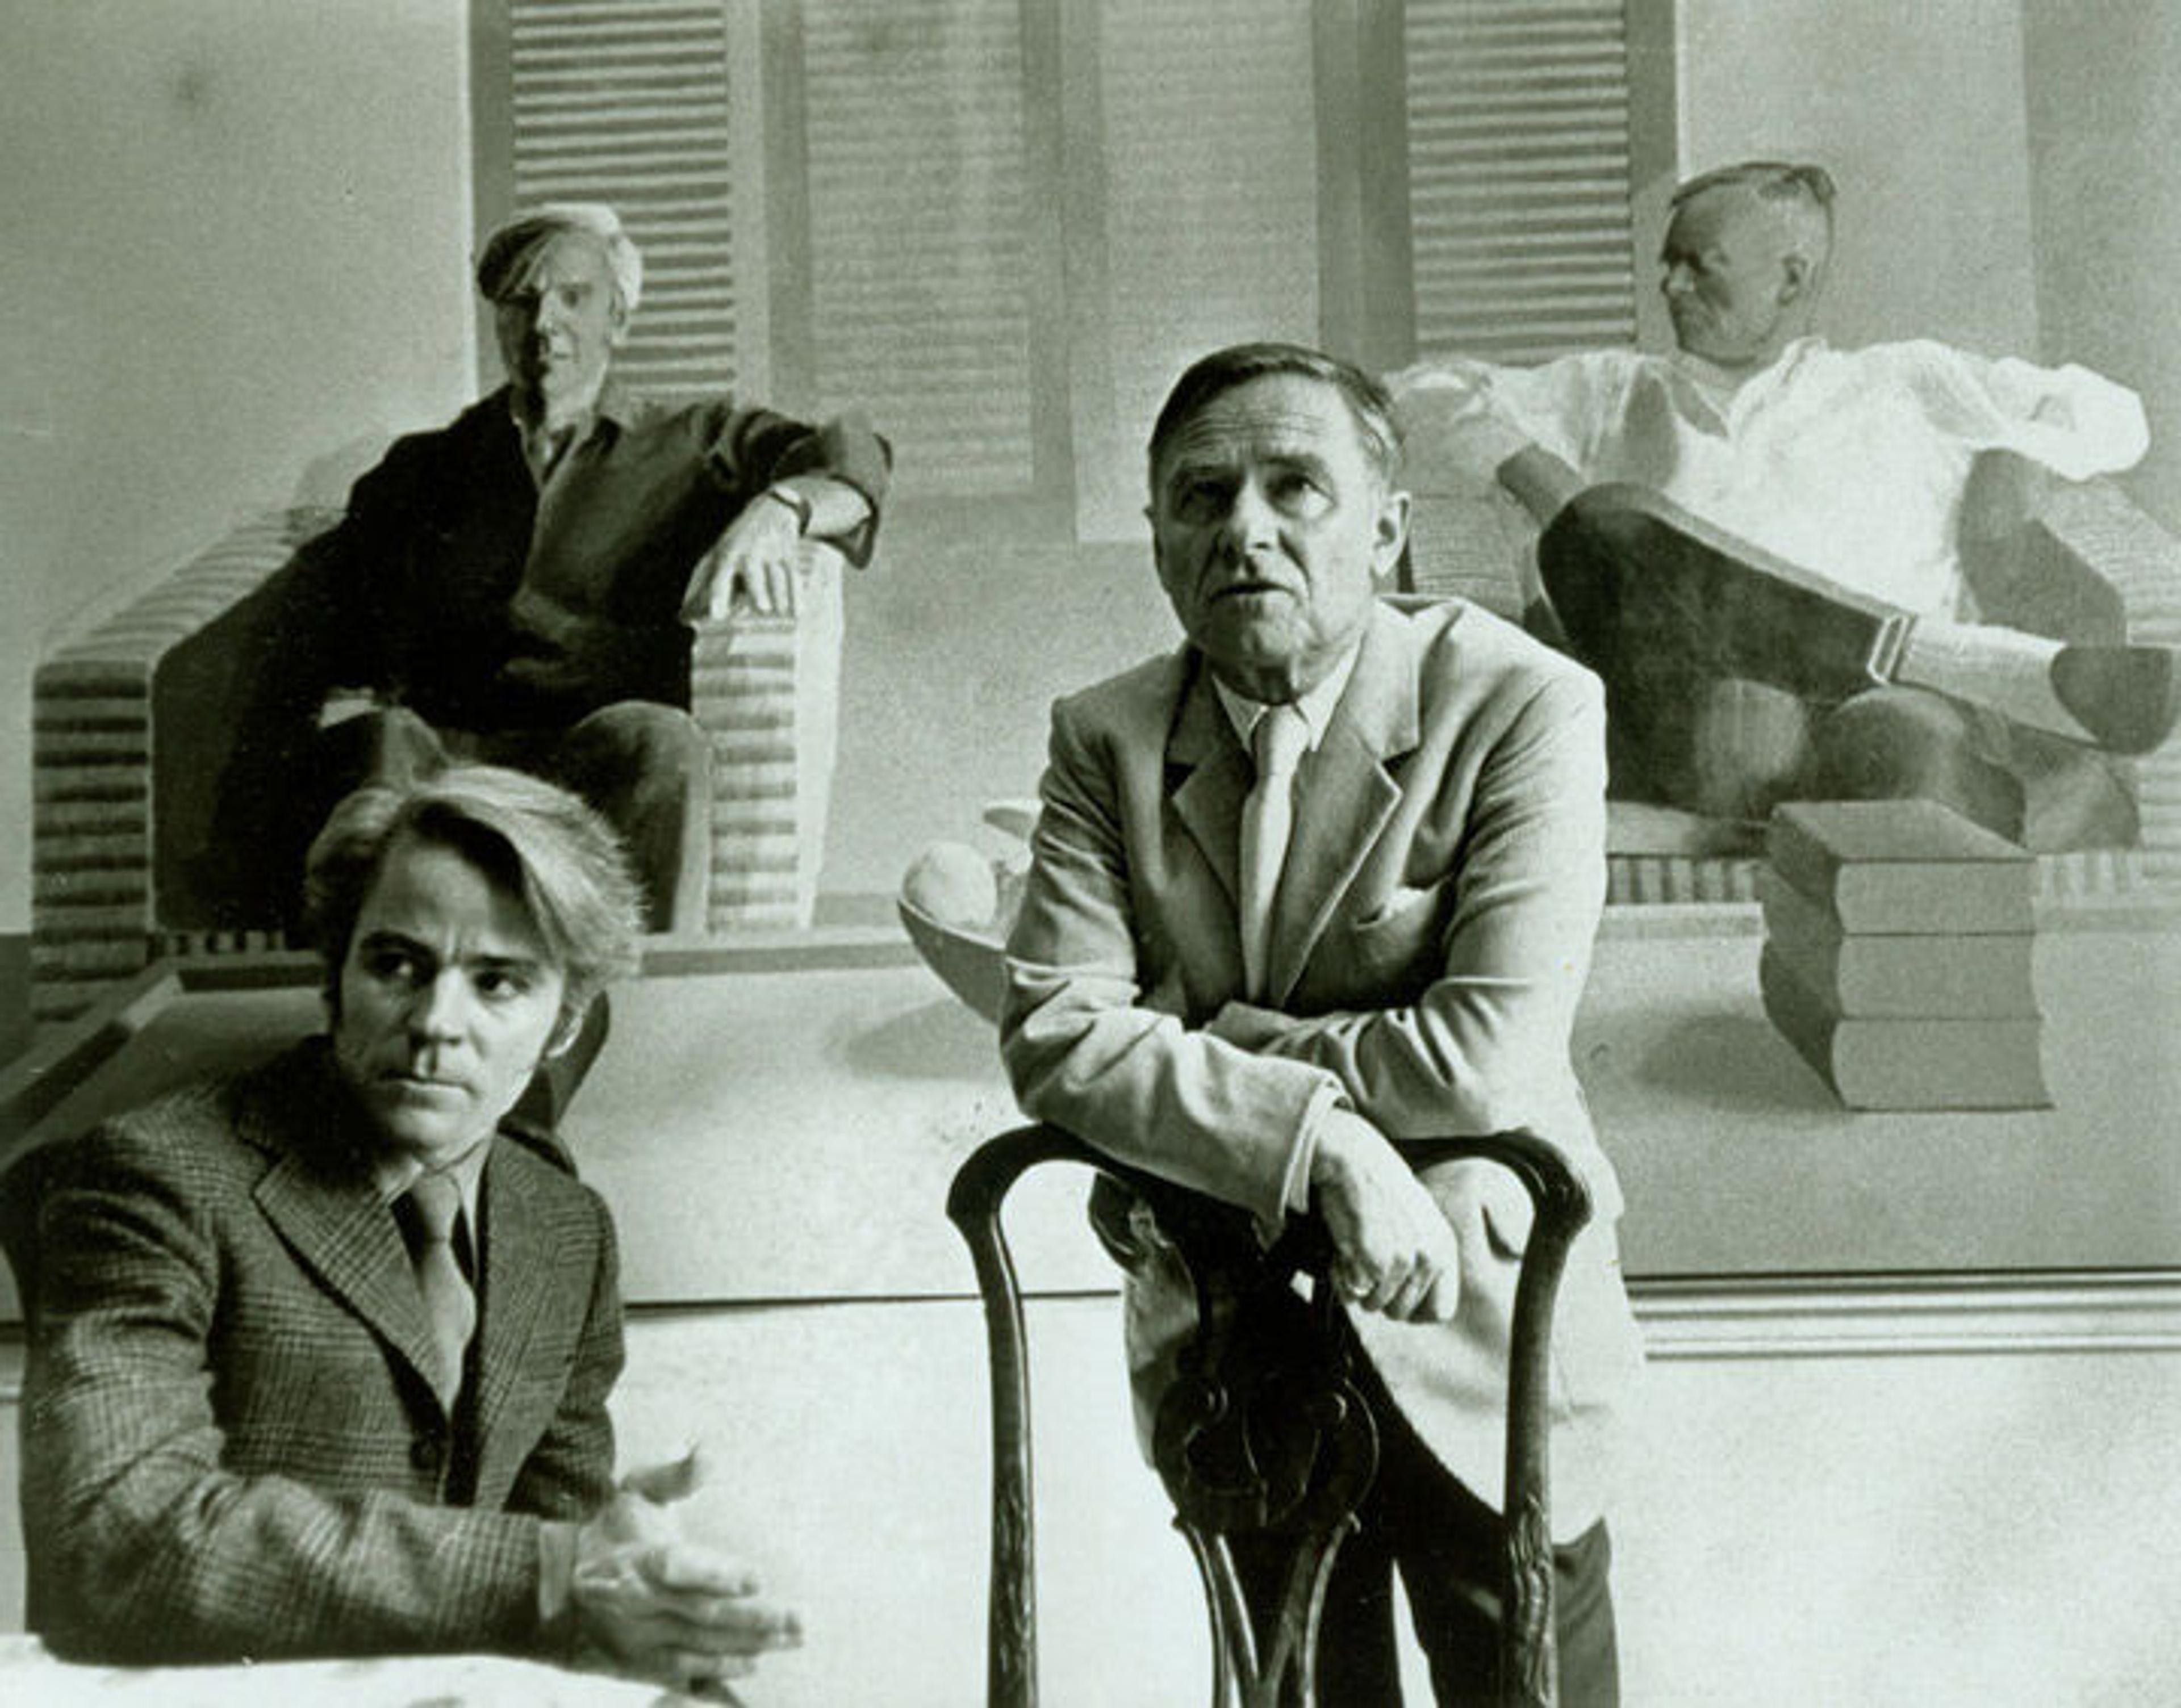 Black-and-white photograph of Christopher Isherwood (right) and Don Bachardy (left) in front of the double-portrait of them painted by David Hockney